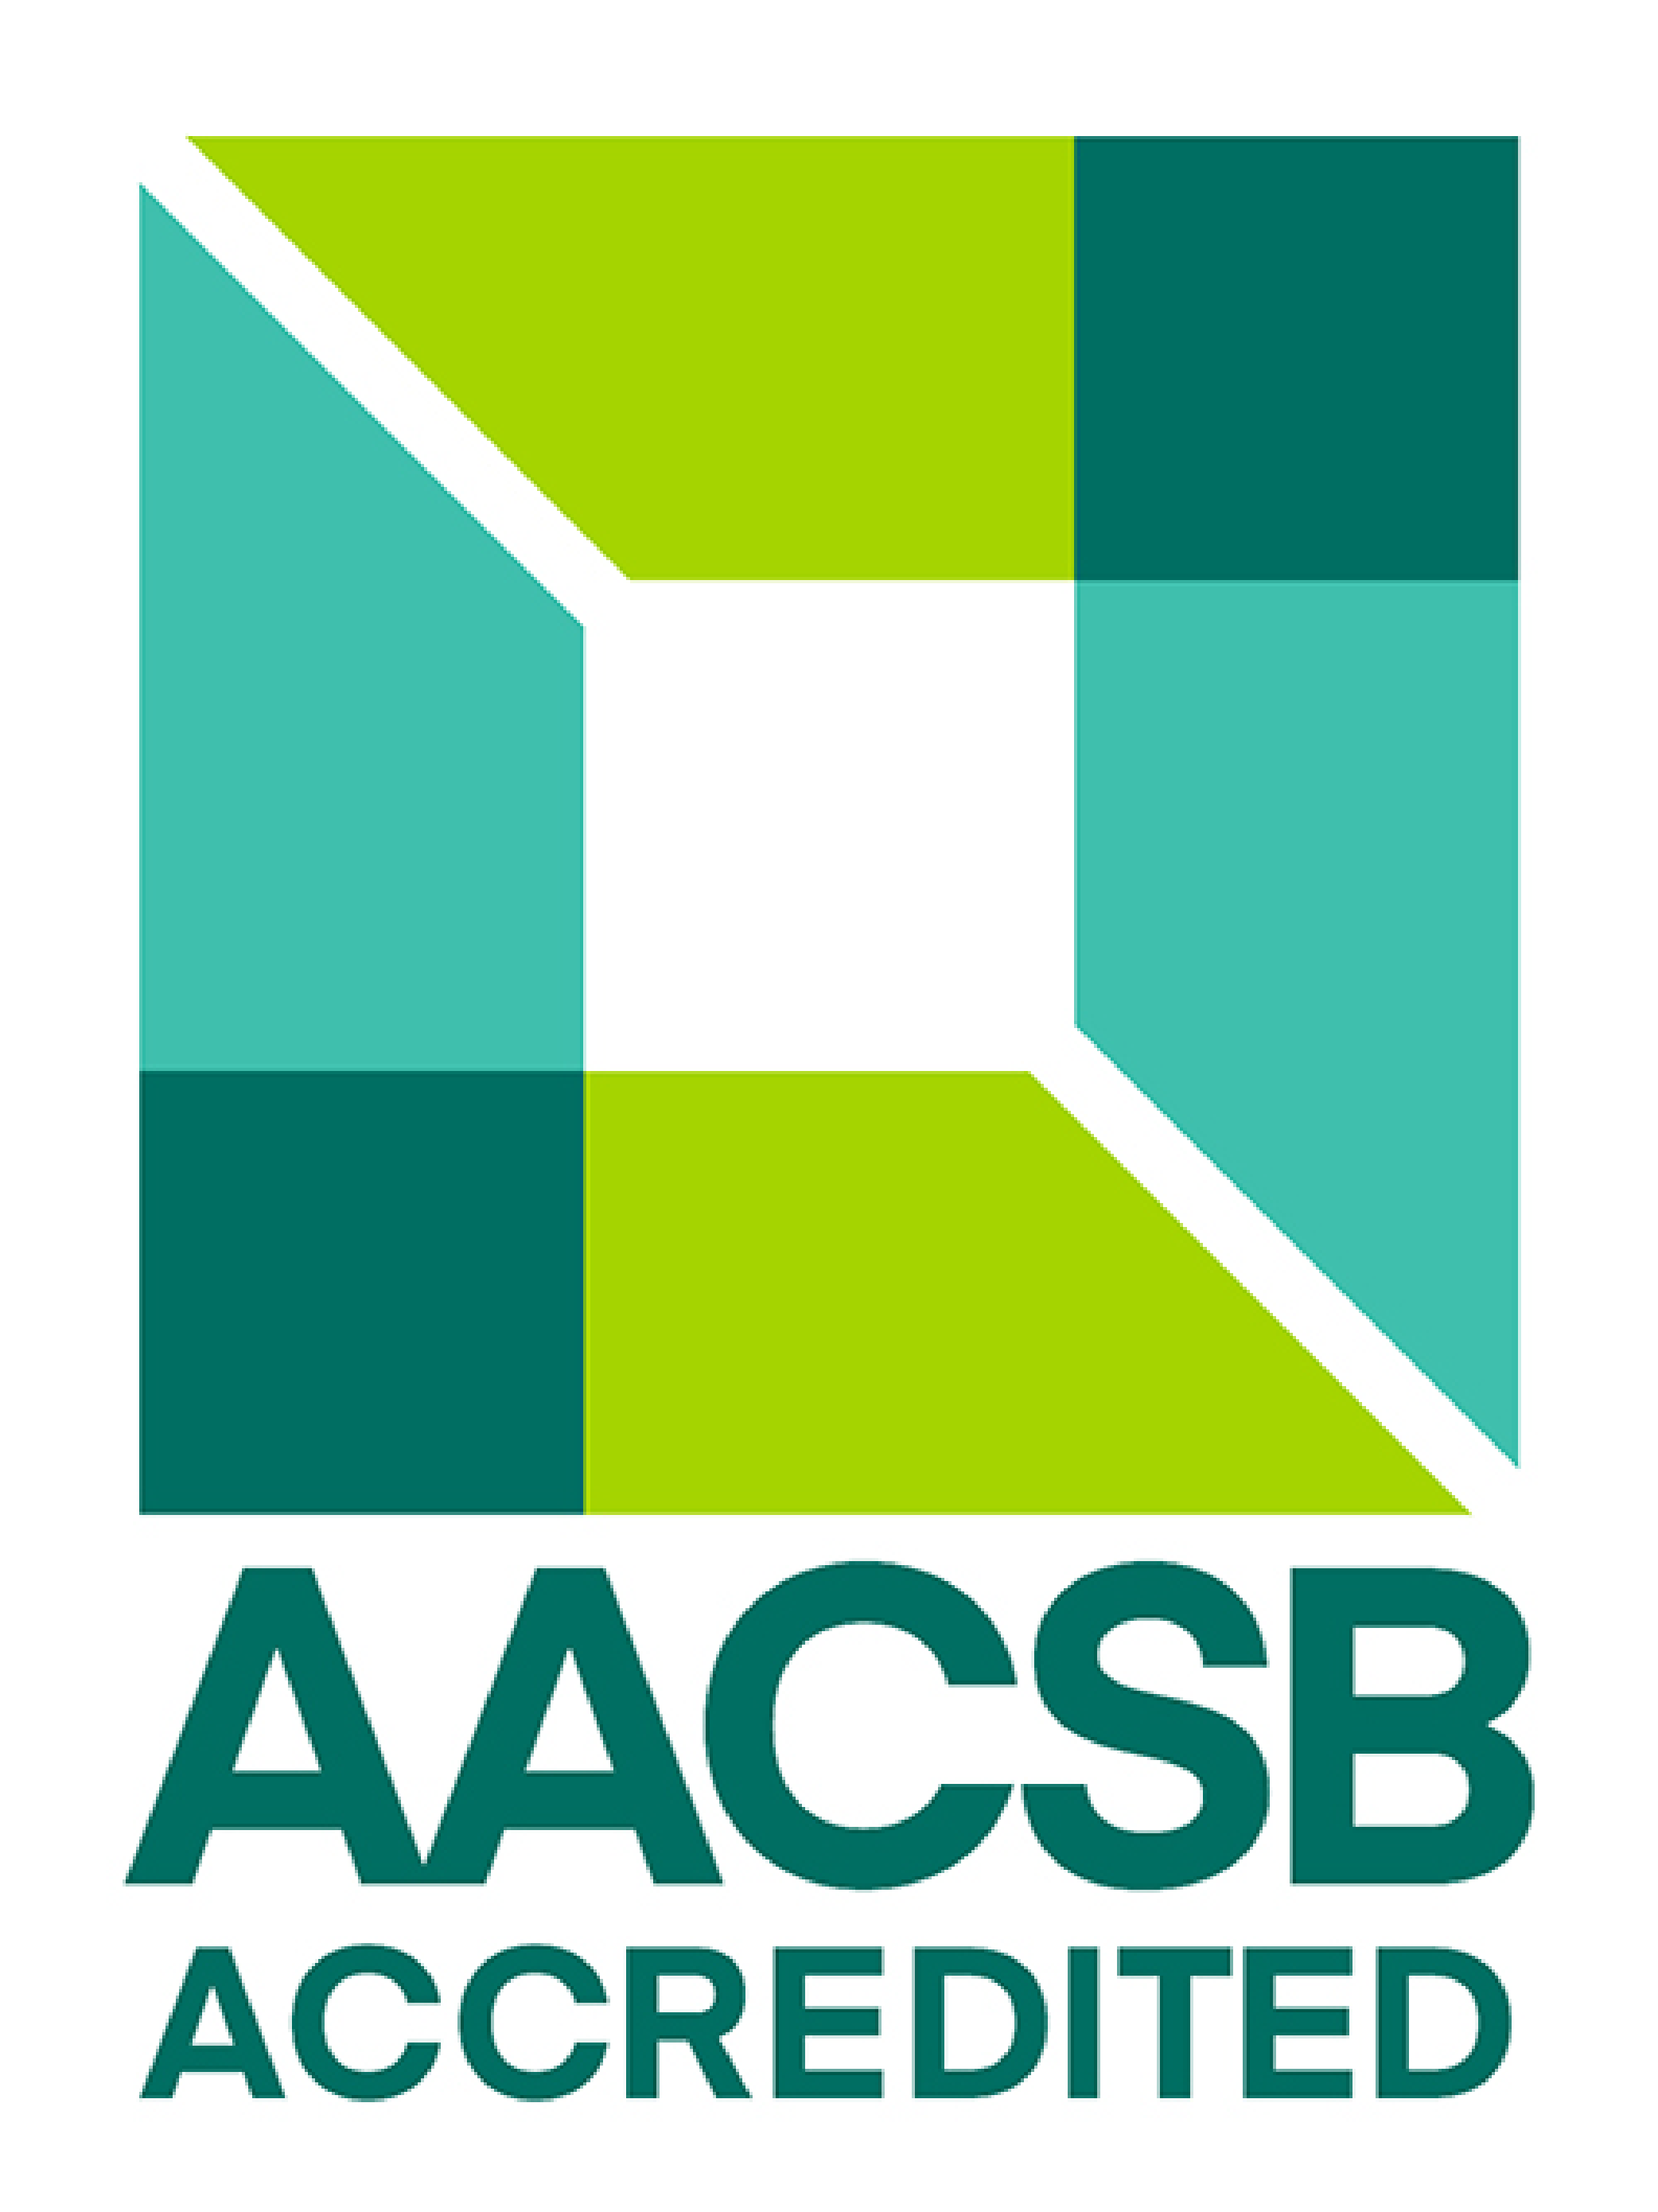 aacsb-vertical.png